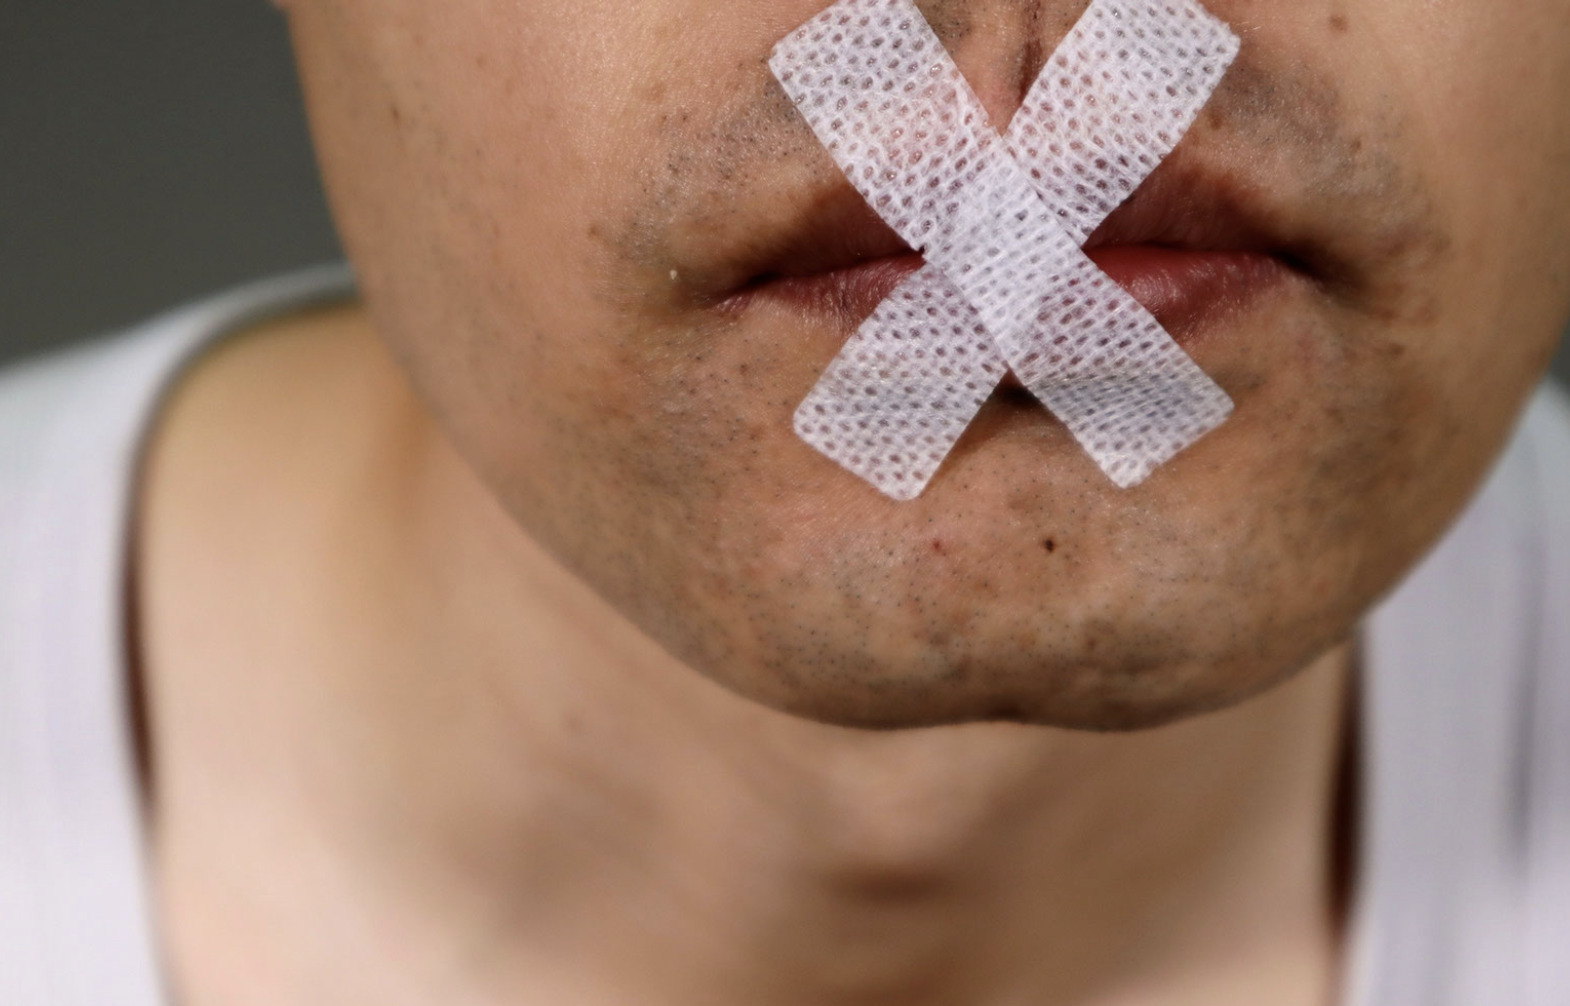 man with X shape medical tape covering his mouth